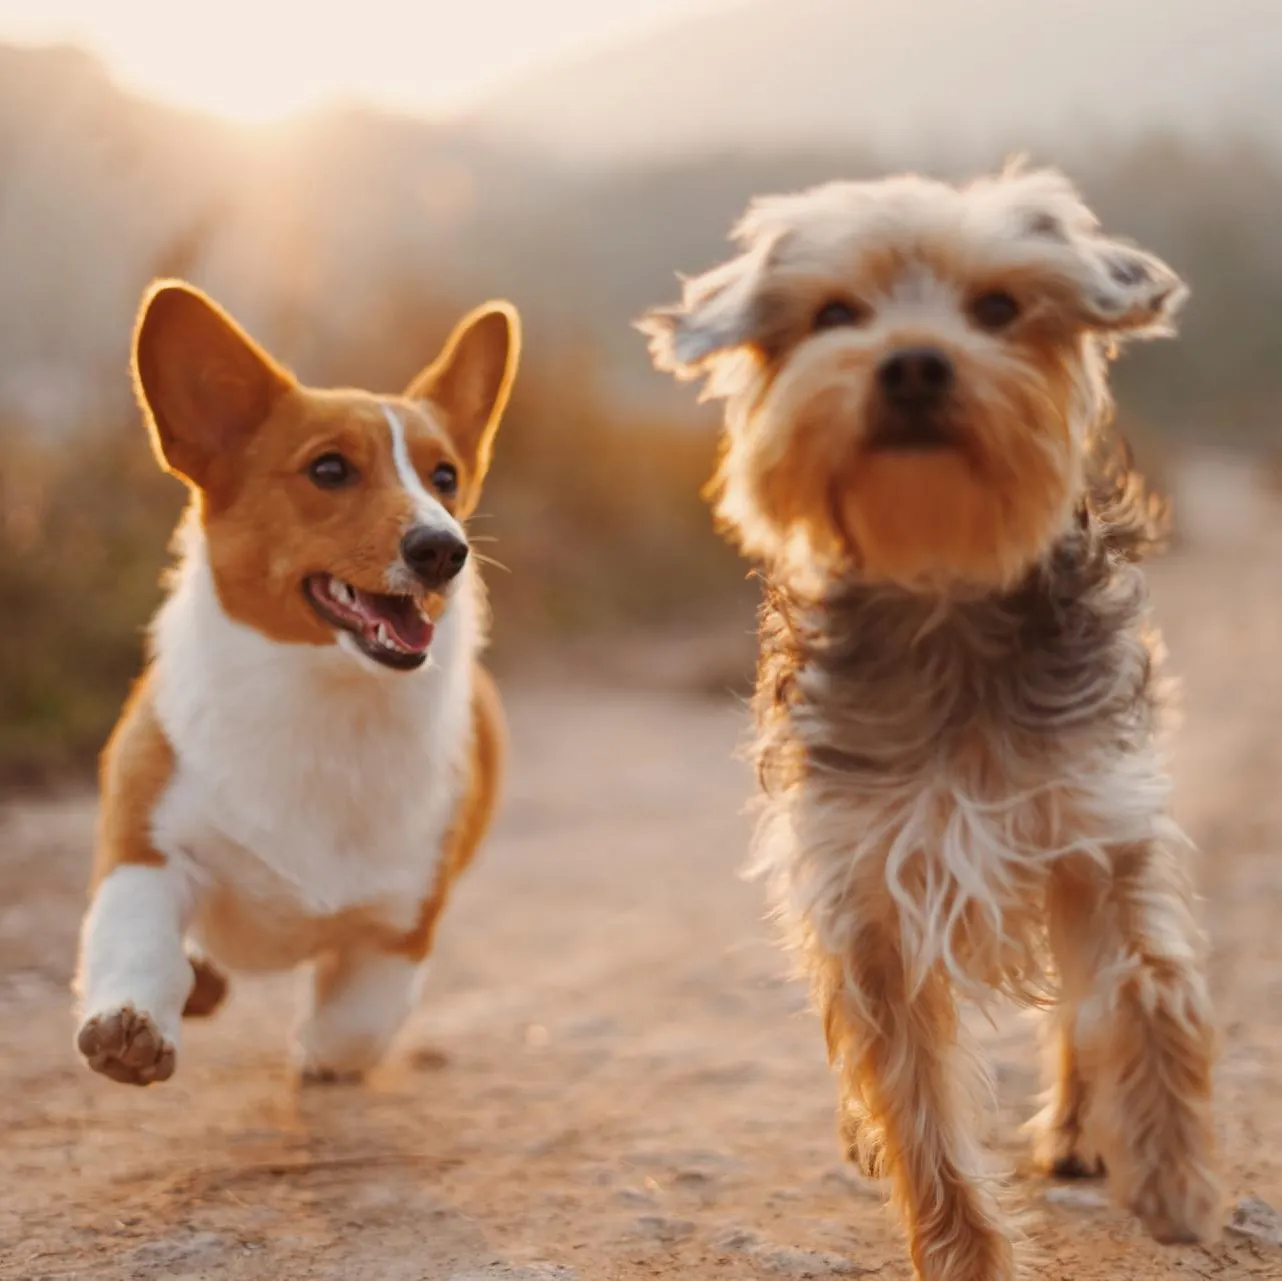 Two dog friends running together